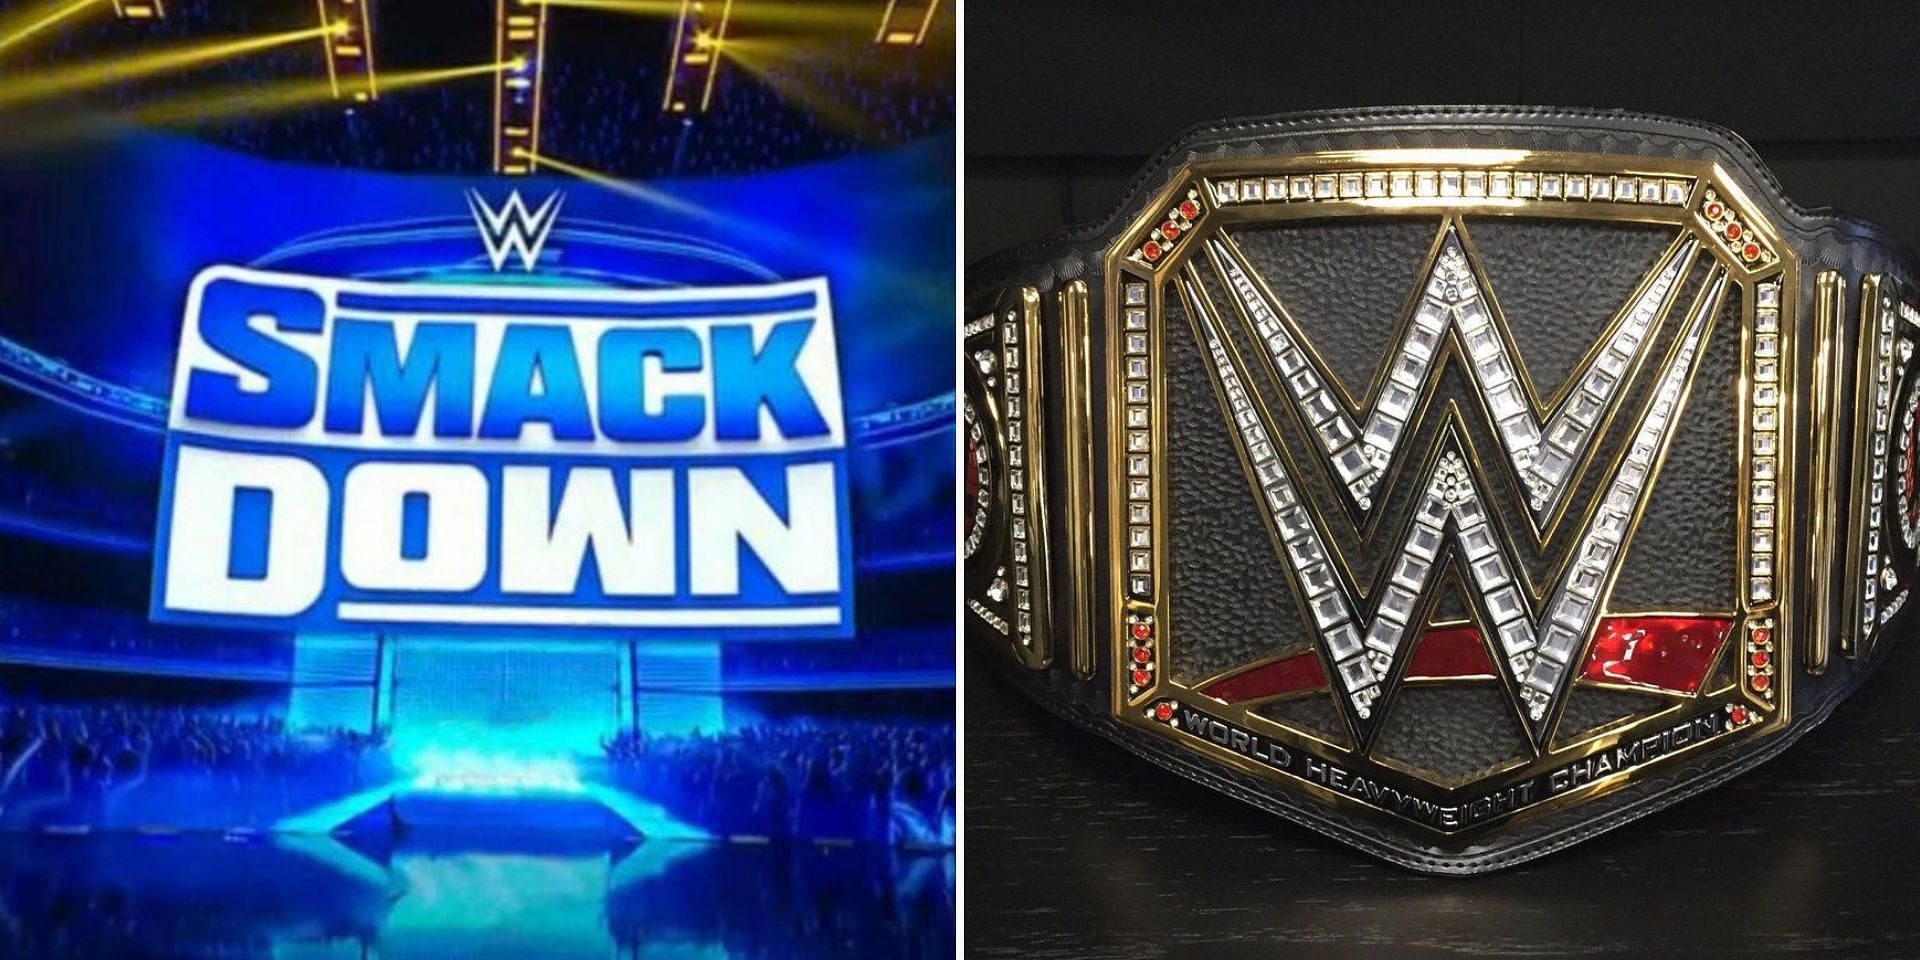 A WWE Hall of Famer will return to SmackDown next week